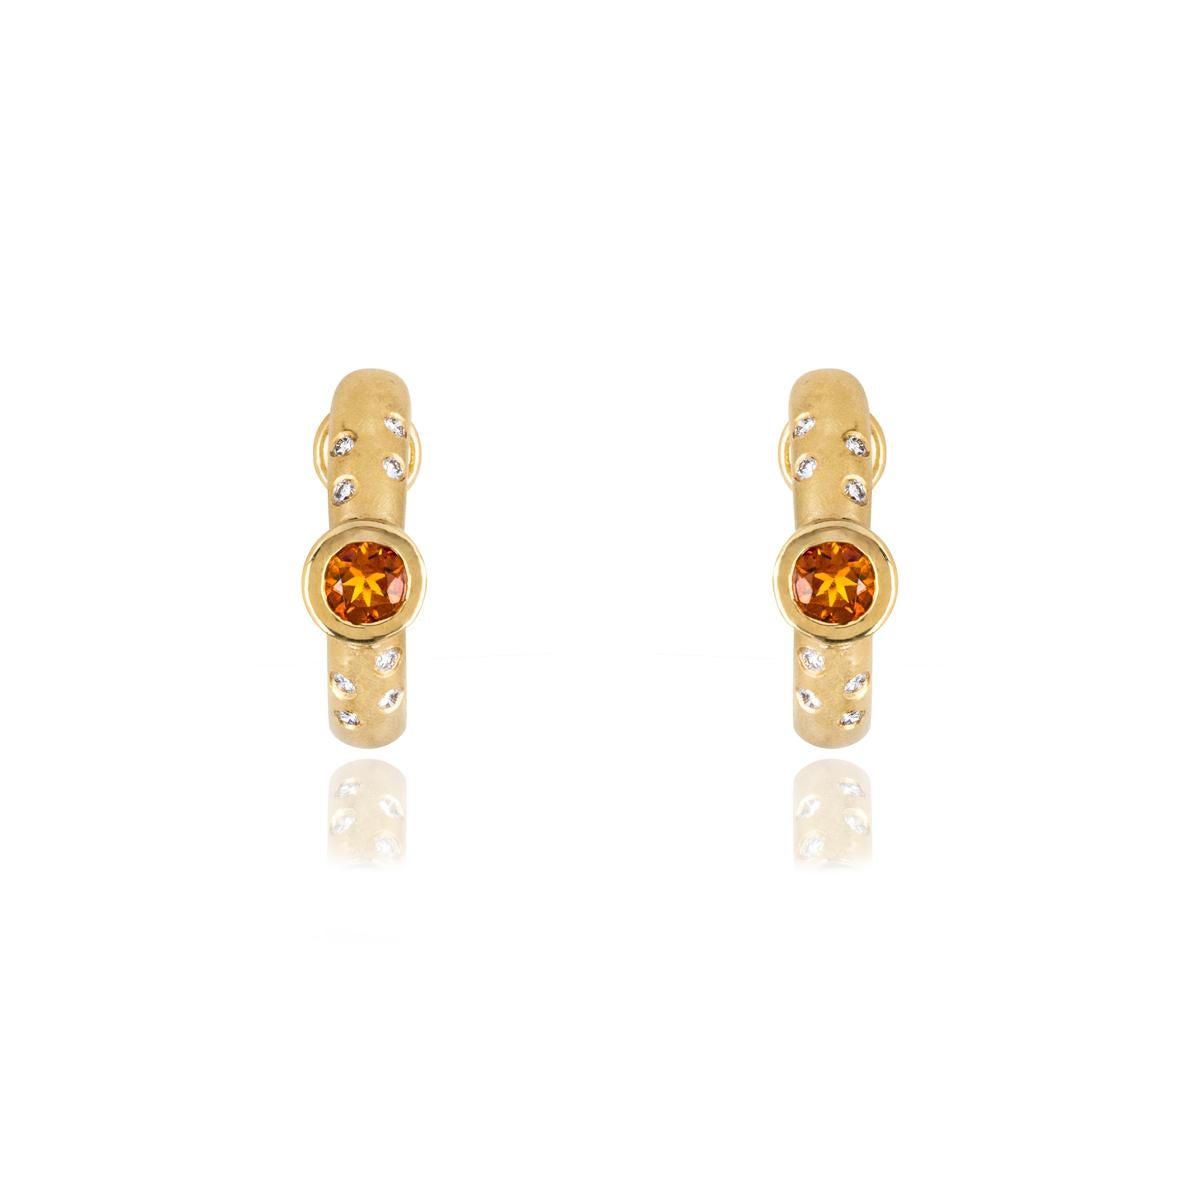 A modern pair of 18k yellow gold citrine and diamond earclips. Each half hoop is bezel set to the centre with a circular faceted citrine weighing approximately 0.44ct each. Complementing the citrine are 8 round brilliant cut diamonds set to each